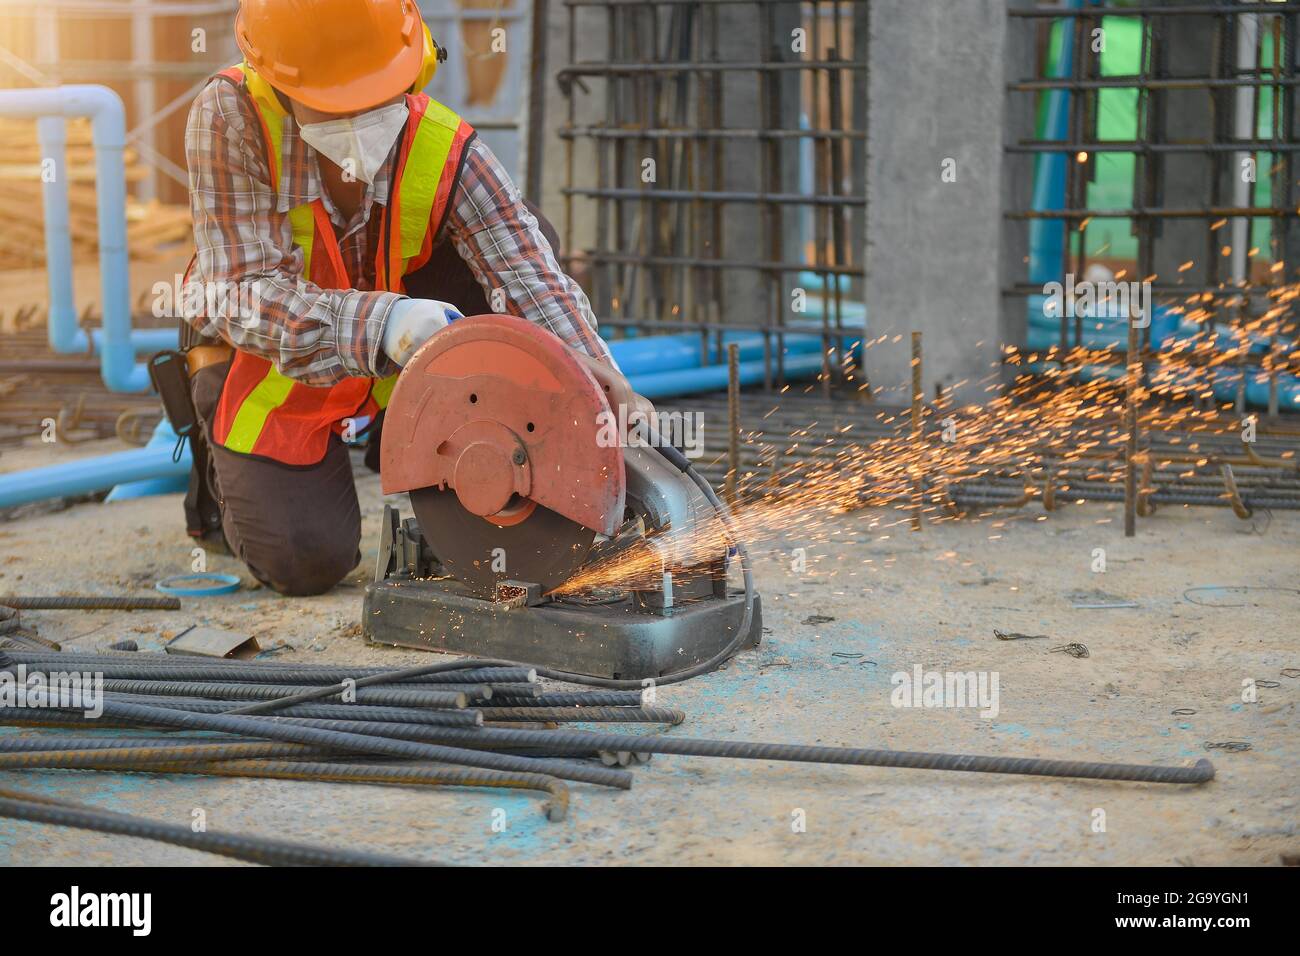 Construction worker using a circular saw on a building site, Thailand Stock Photo